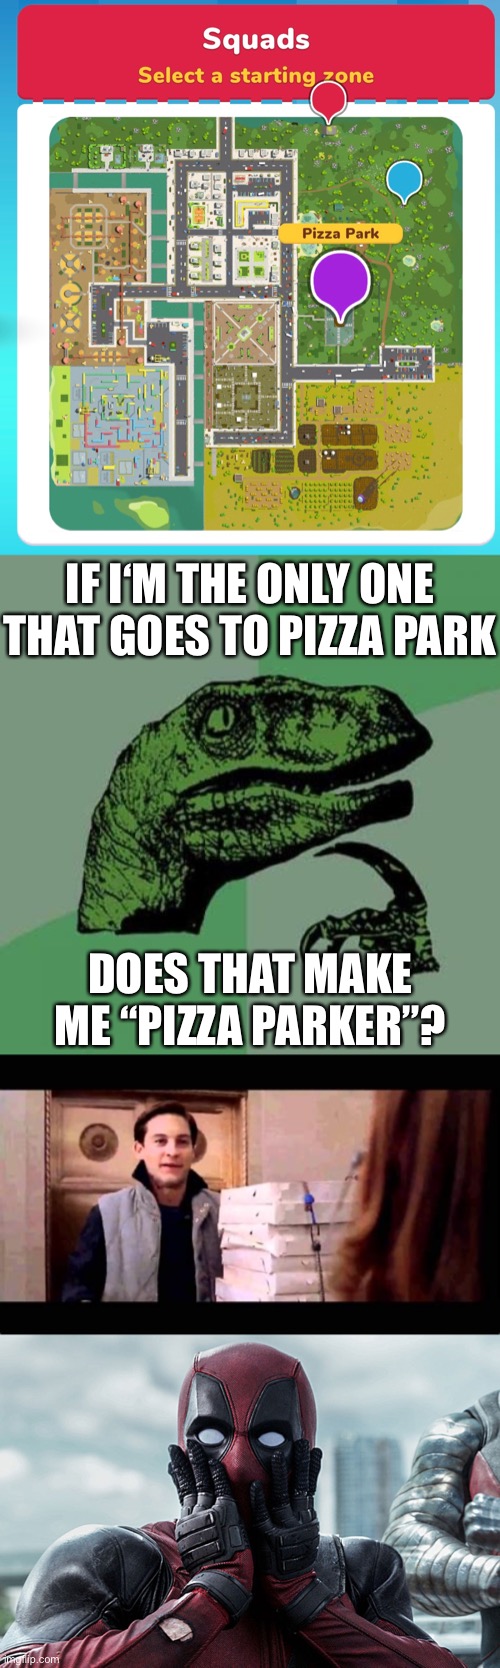 Pizza-Man? | IF I‘M THE ONLY ONE THAT GOES TO PIZZA PARK; DOES THAT MAKE ME “PIZZA PARKER”? | image tagged in memes,philosoraptor,deadpool - gasp,butter royale,pizza parker,funny | made w/ Imgflip meme maker